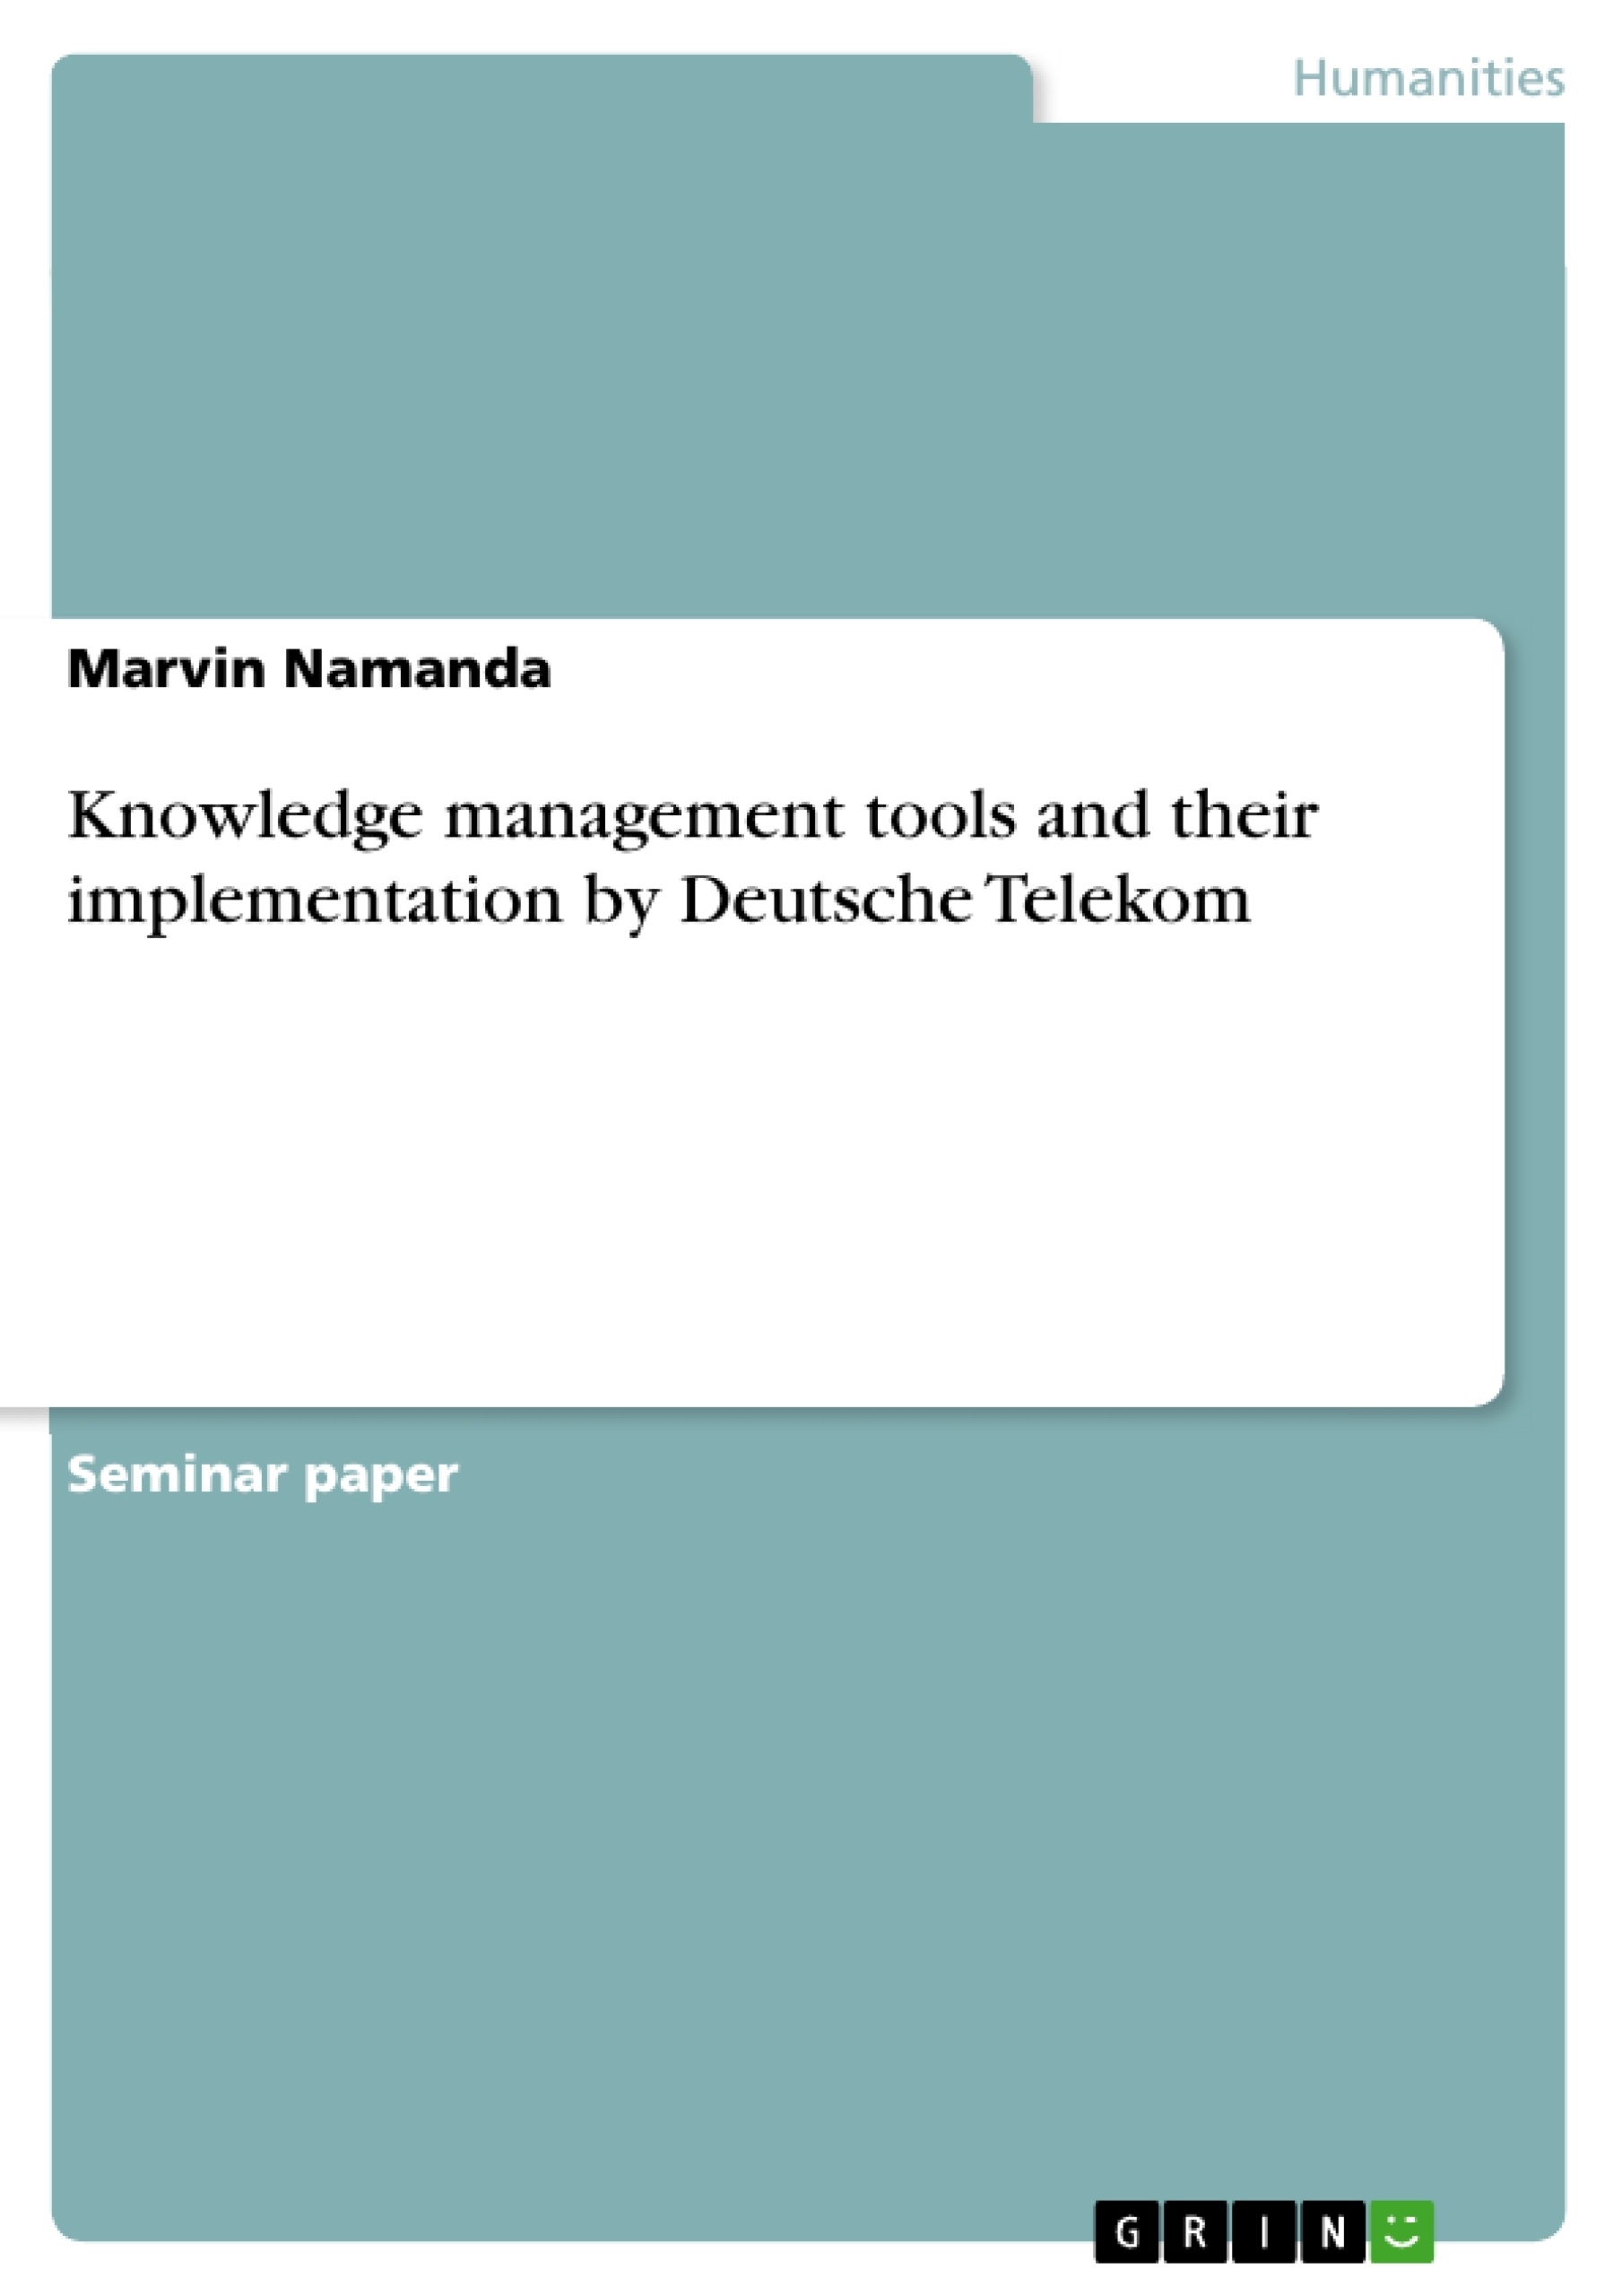 Title: Knowledge management tools and their implementation by Deutsche Telekom